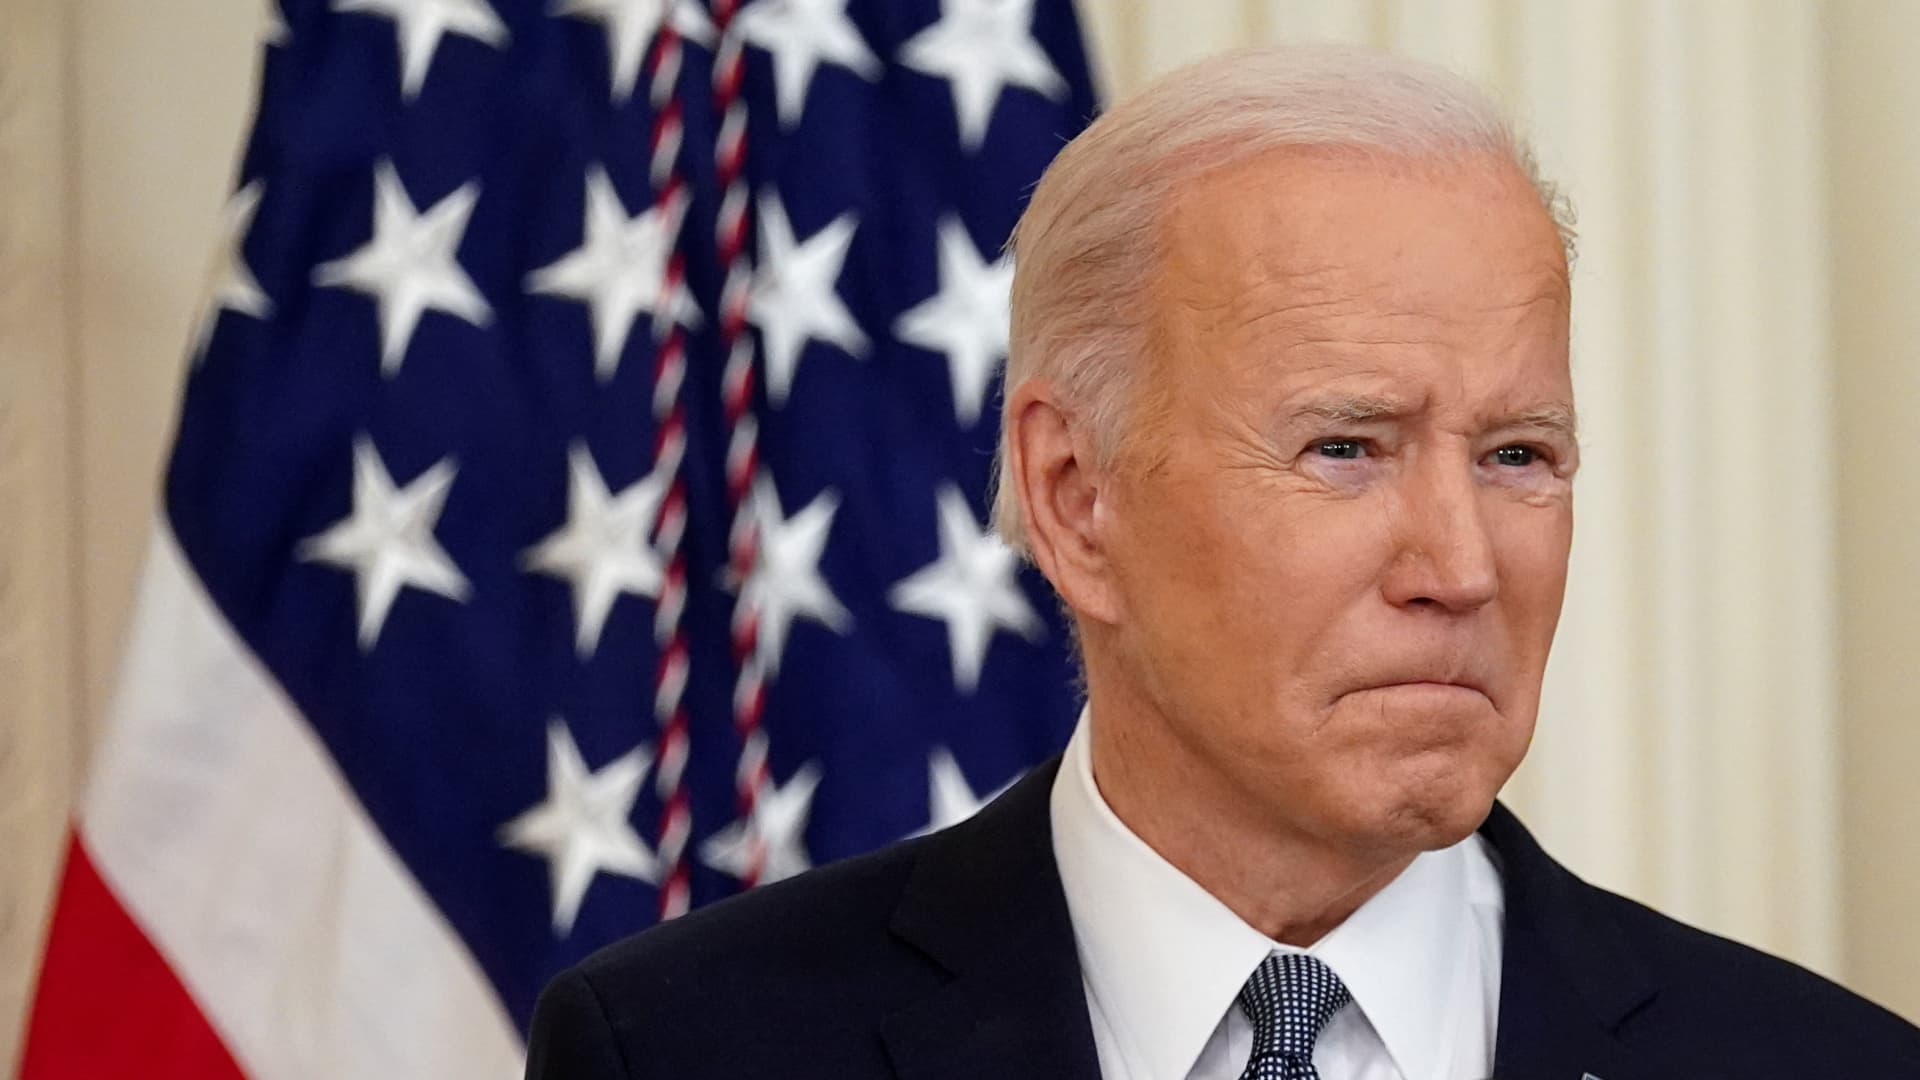 U.S. President Joe Biden pauses while speaking at a Black History Month celebration event at the White House in Washington, U.S., February 28, 2022.